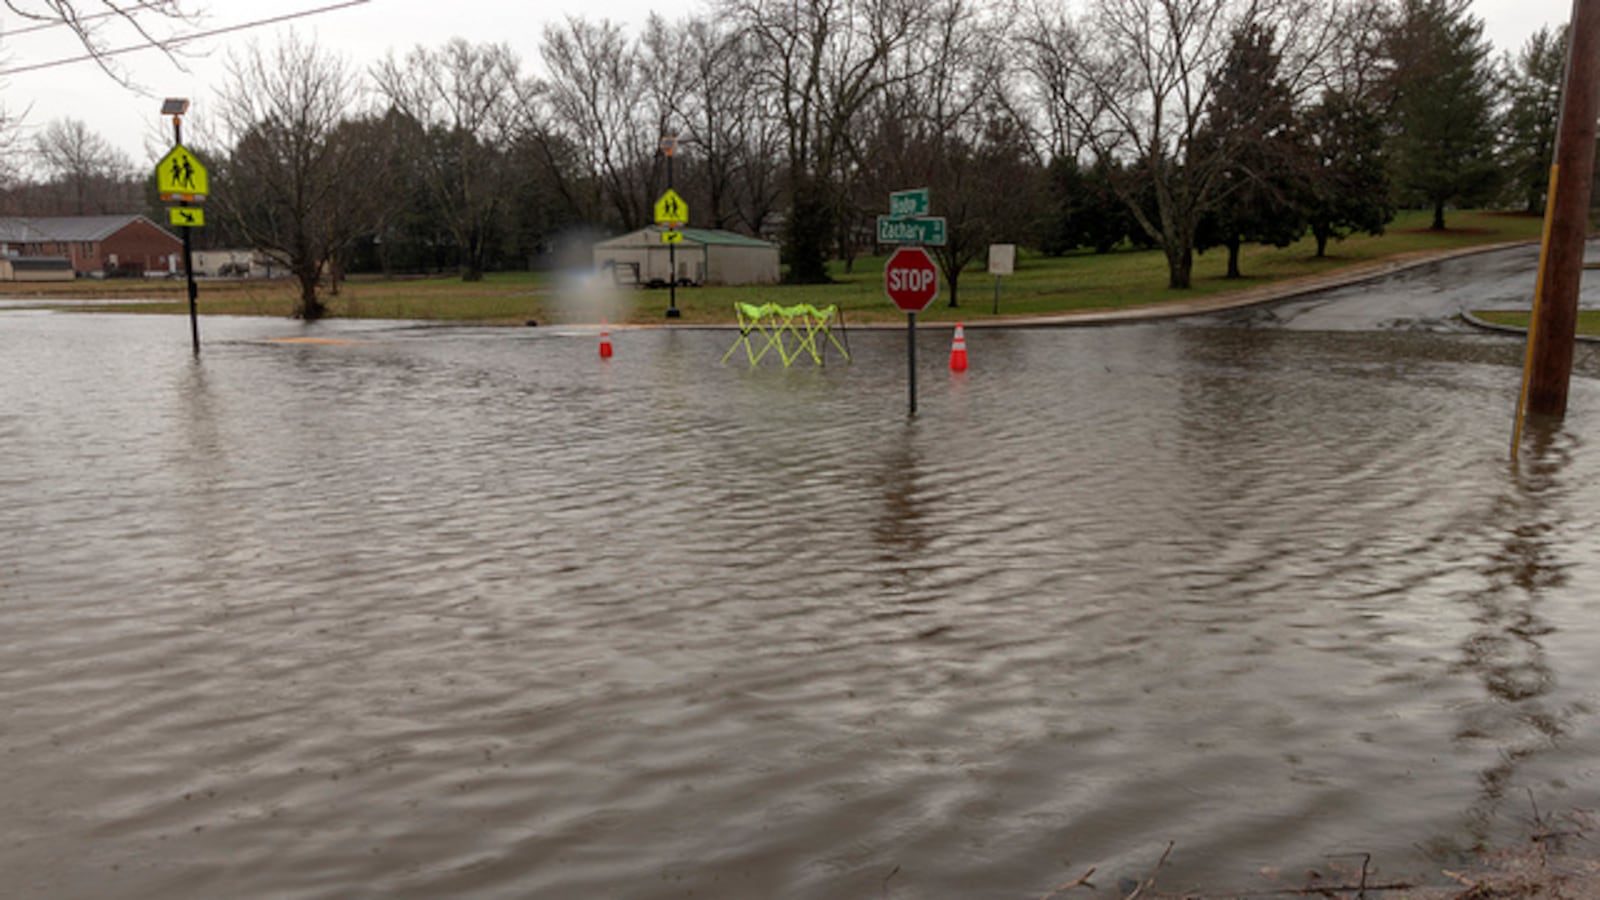 Flash floods caused by heavy rains shutter streets in Overton County, home to one of many Tennessee districts that have closed schools in February due to flooding or illness.